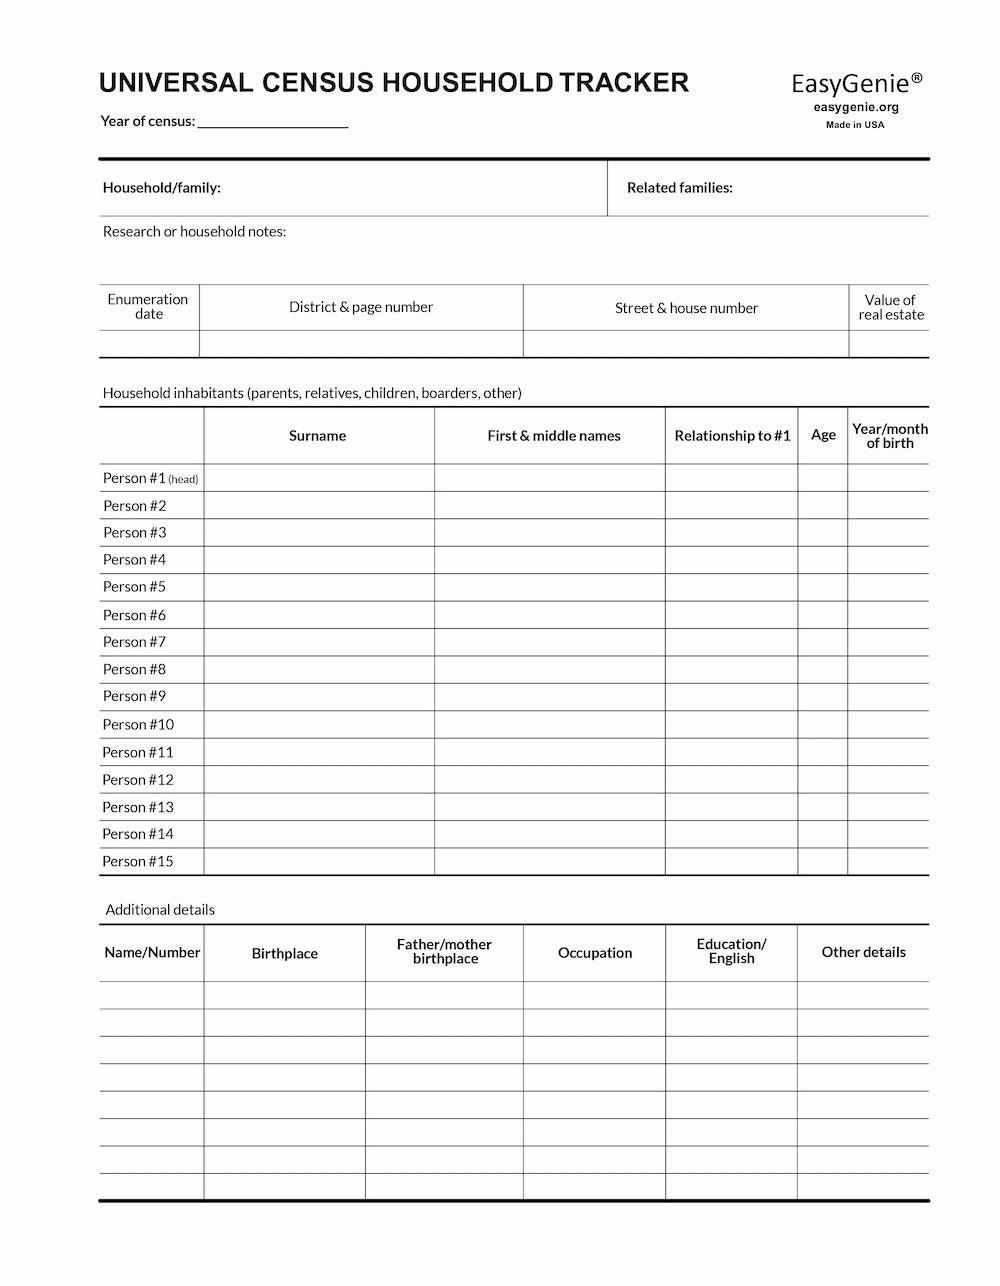 Universal Census Household Tracker (7 Forms)